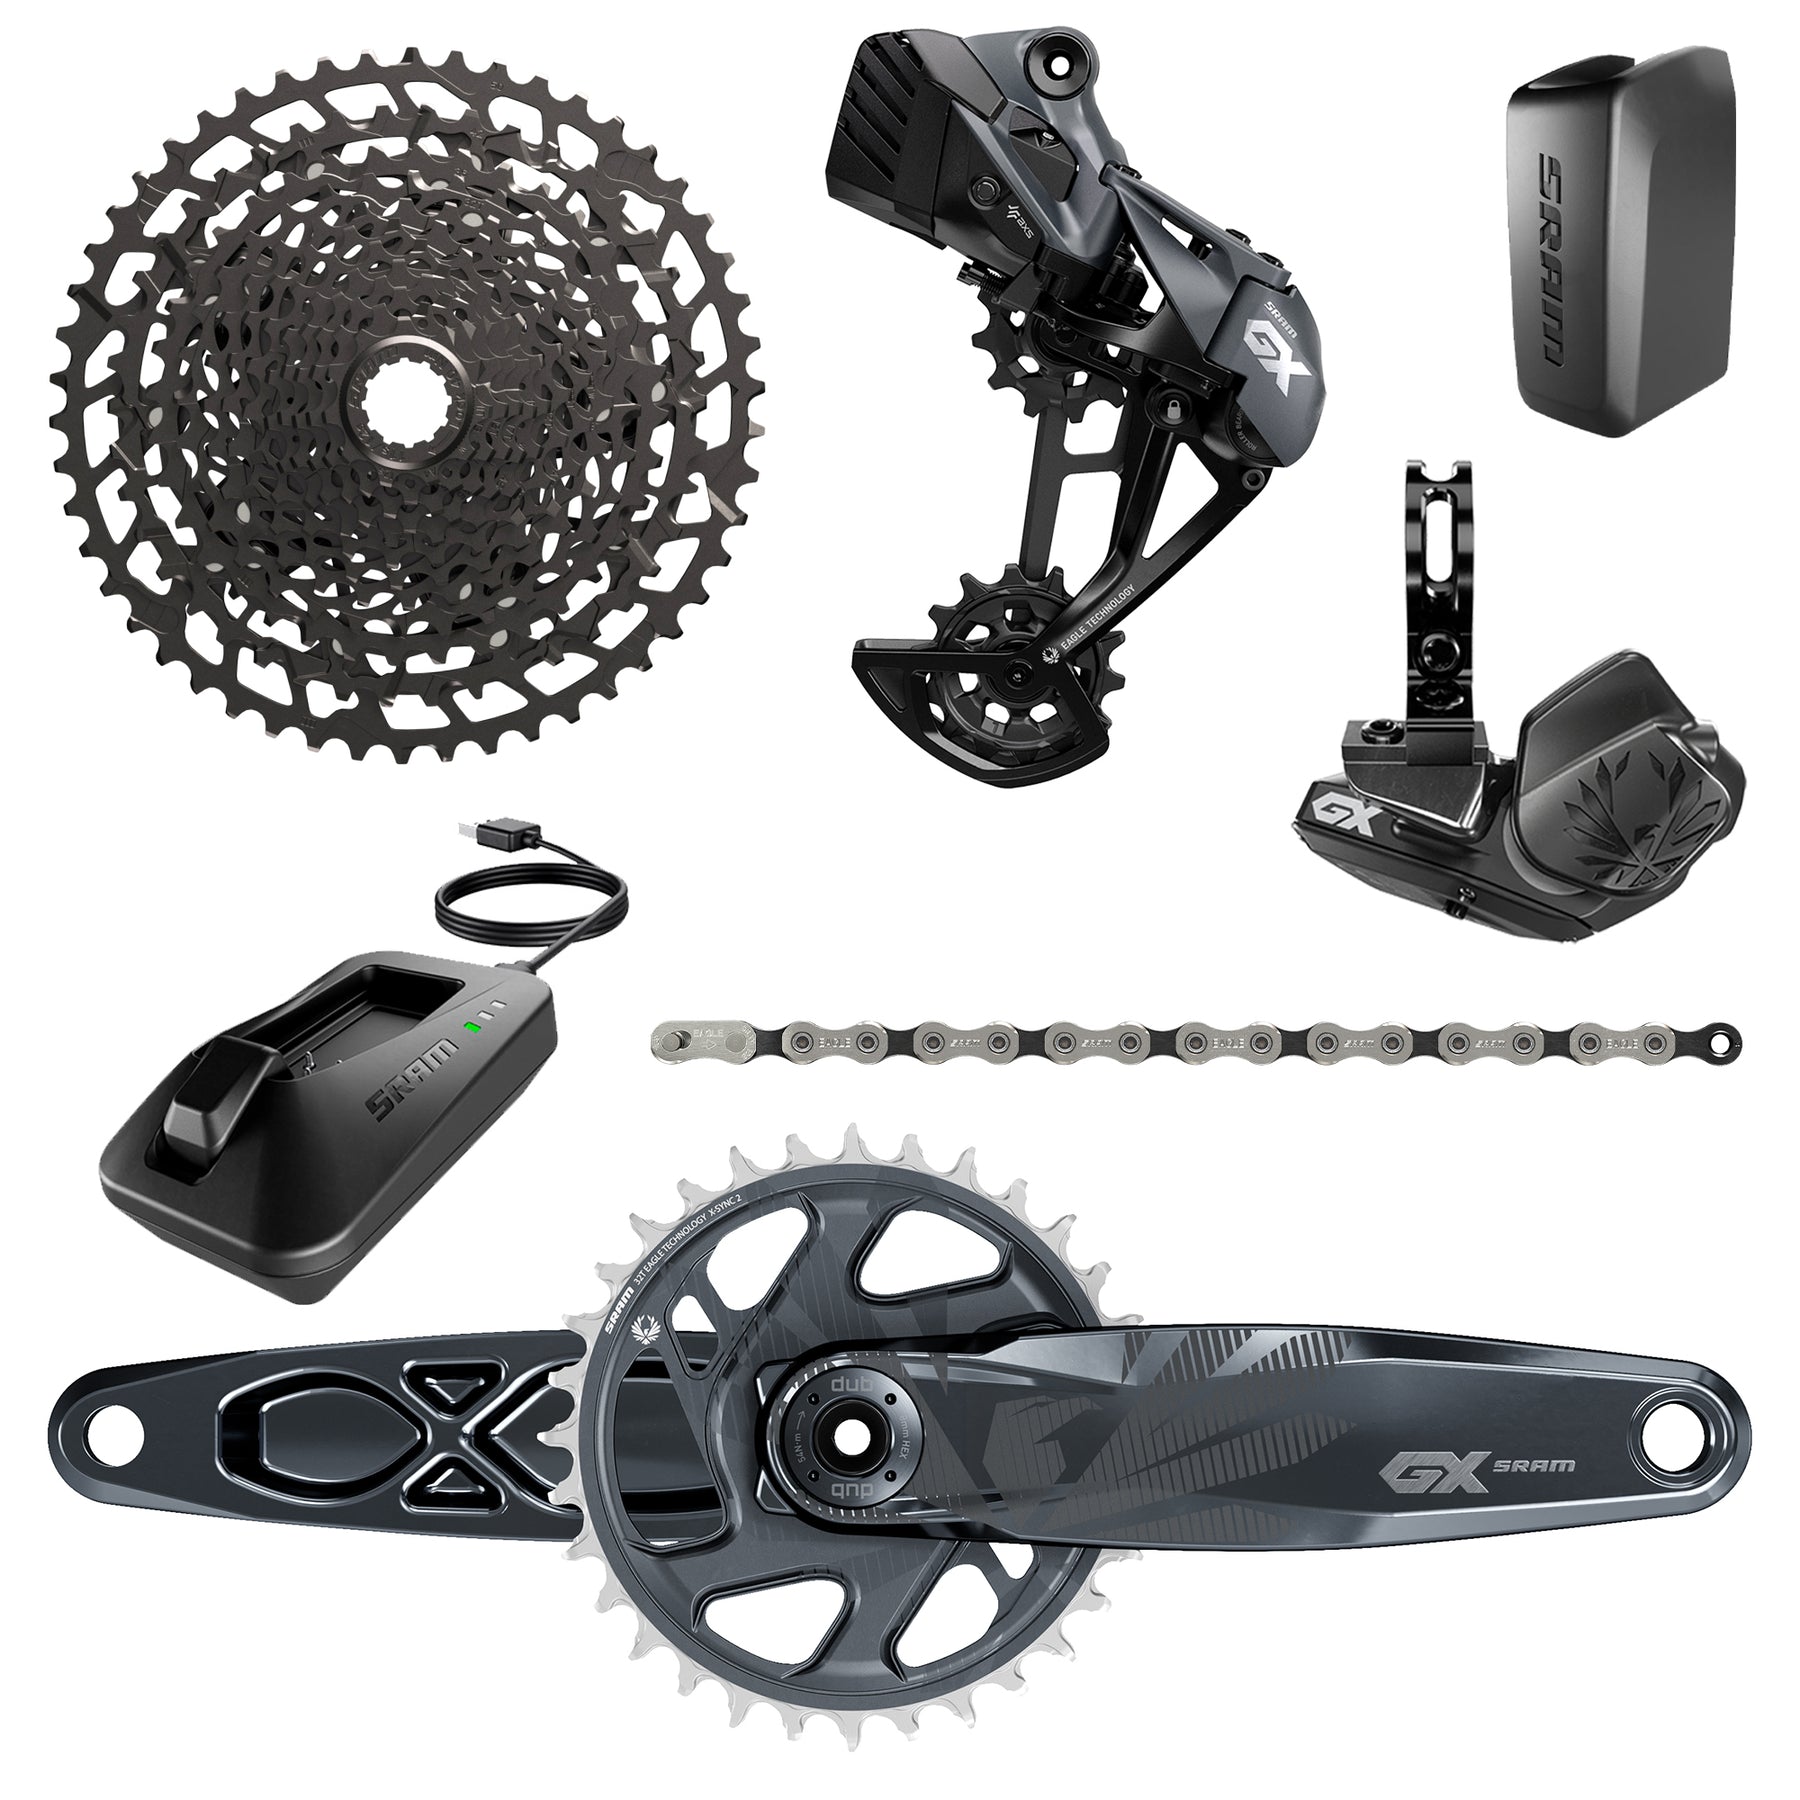 SRAM GX Eagle AXS DUB Groupset - 11-50T - Includes: Rear Der & Battery, Trigger Shifter Wclamp, Crankset DUB 12S 170/175 Boost Wdm 32T Xsync2 Chainring, GX Eagle Chain, Cassette Pg-1230 11-50T, Charger/Cord, Chaingap Gauge 170MM 